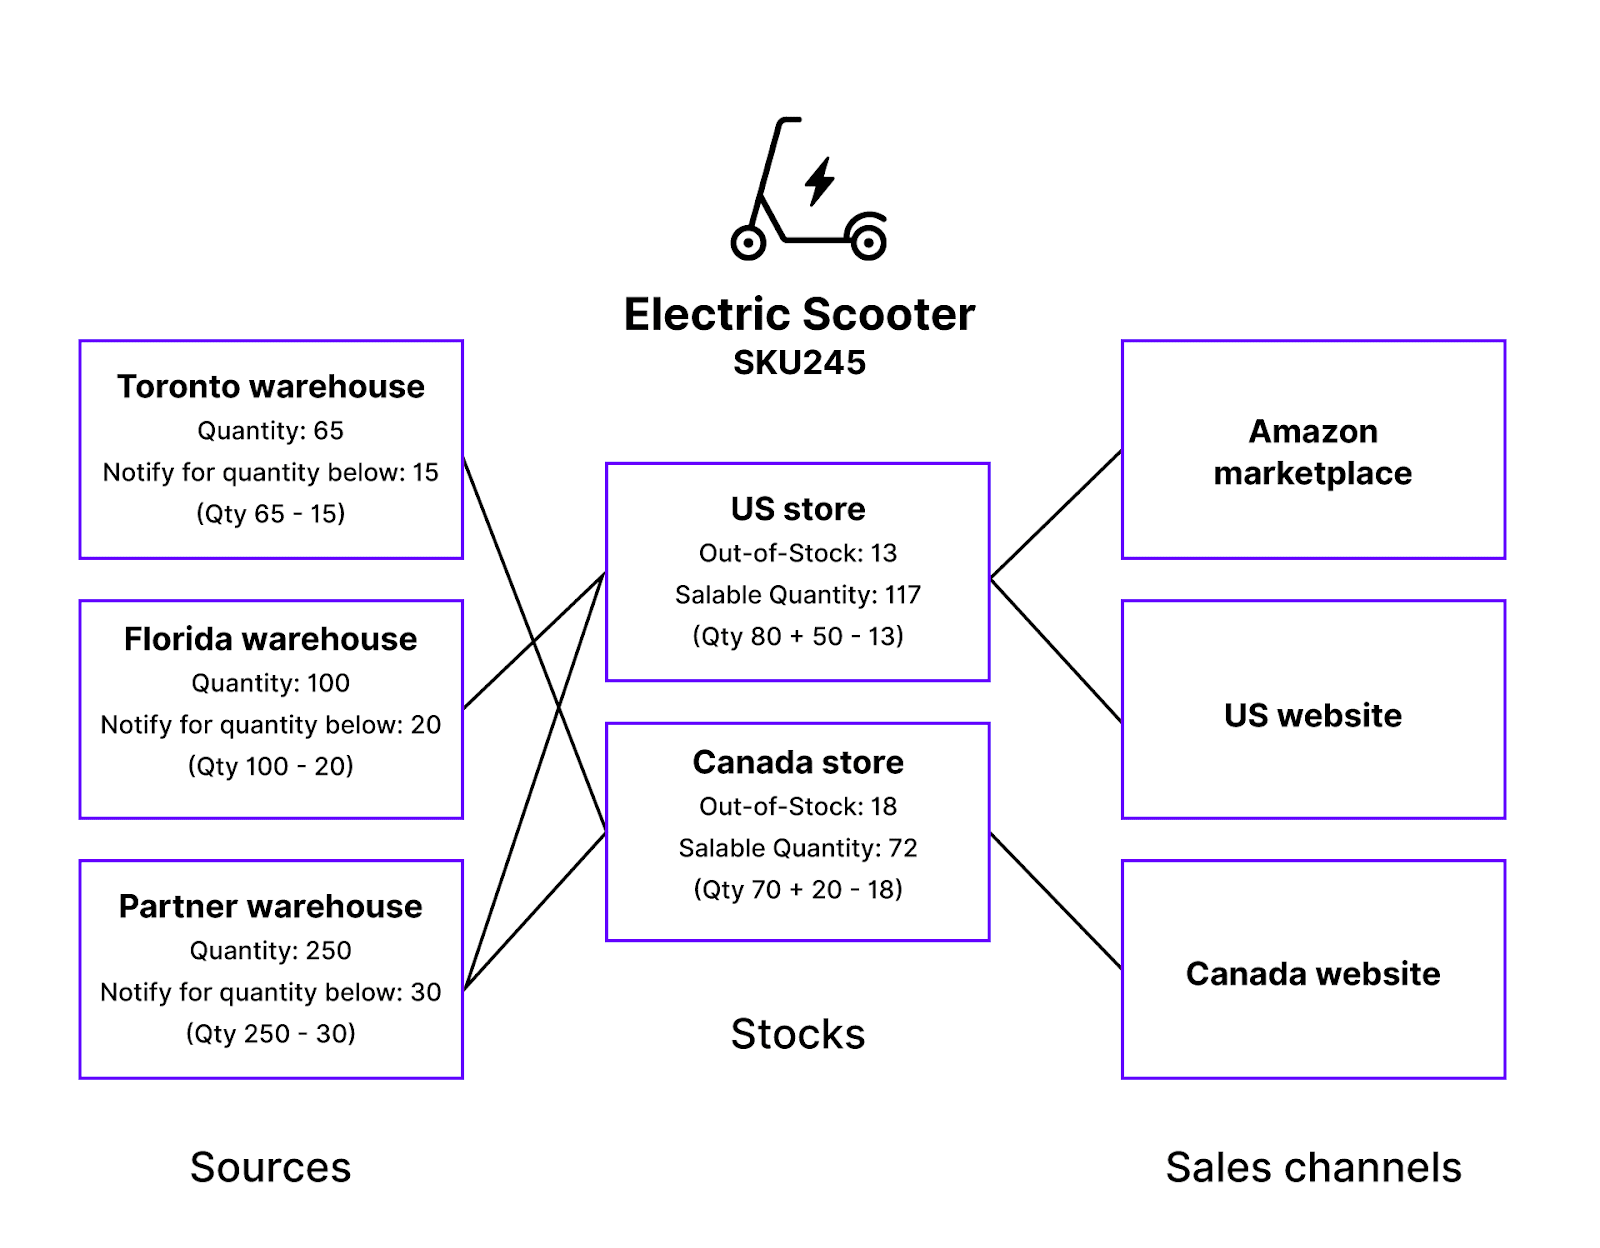 This chart displays the connection between stock sources, aggregated stocks, and sales channels.